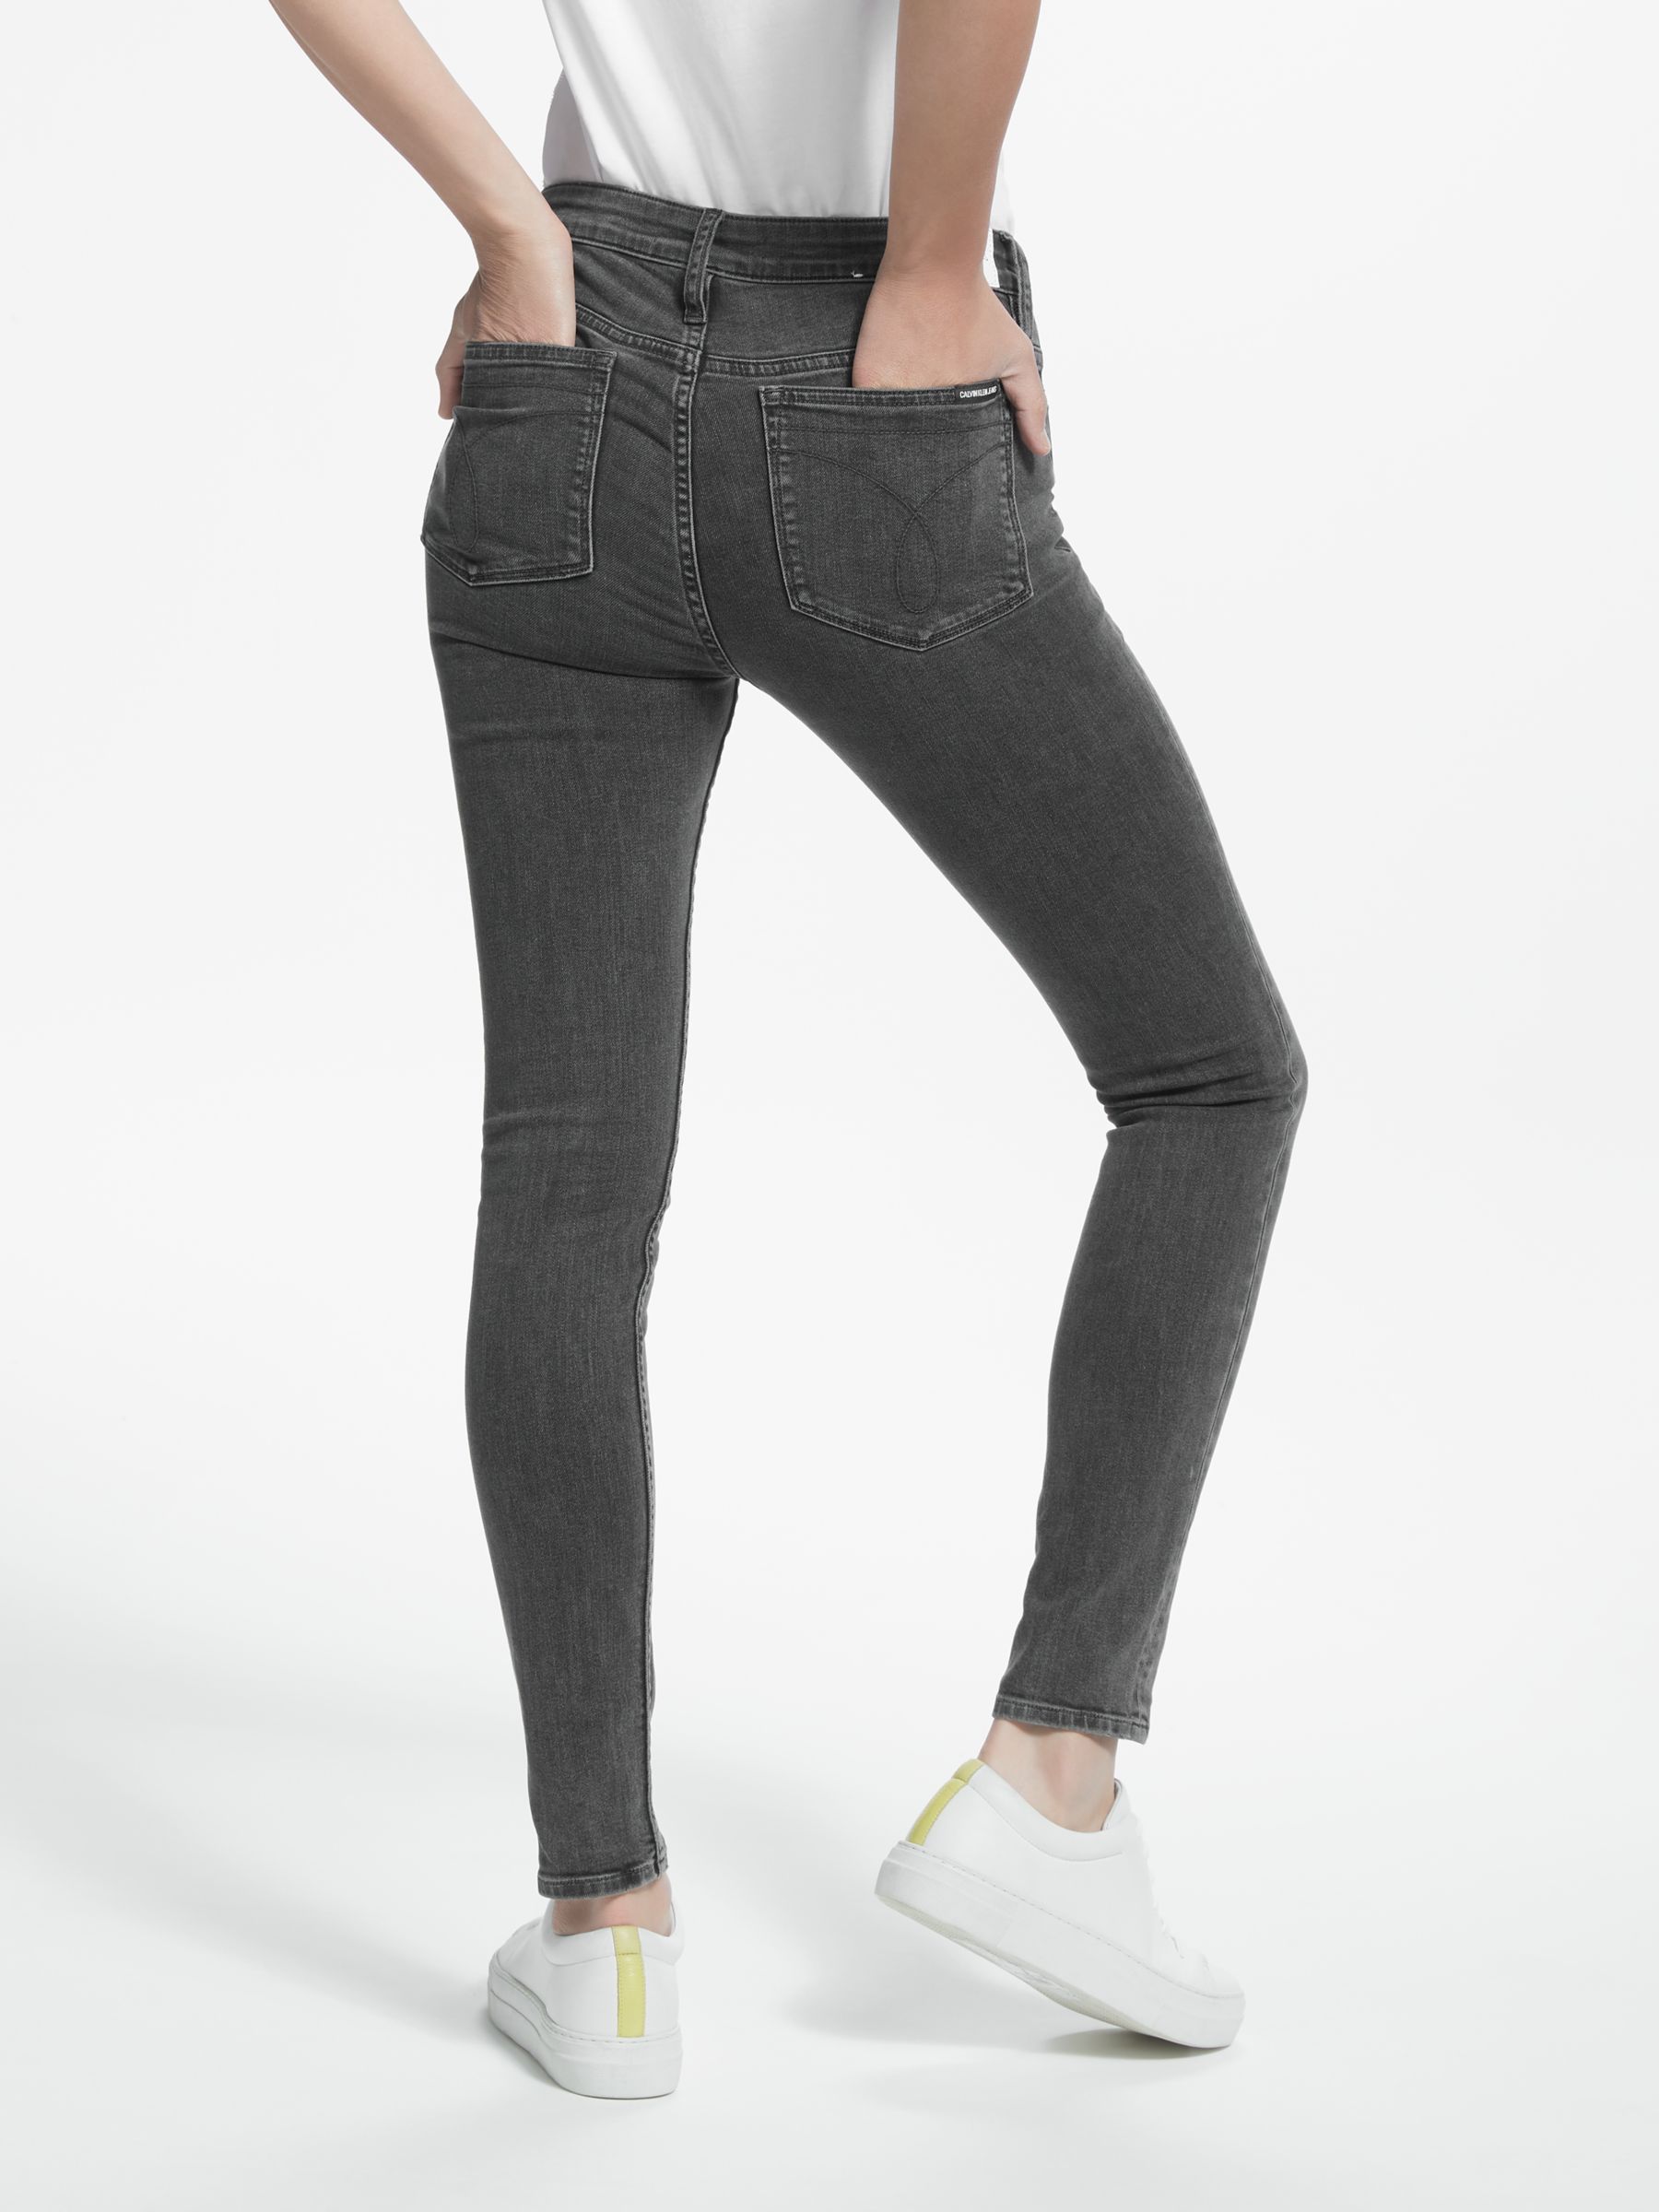 grey mid rise skinny jeans